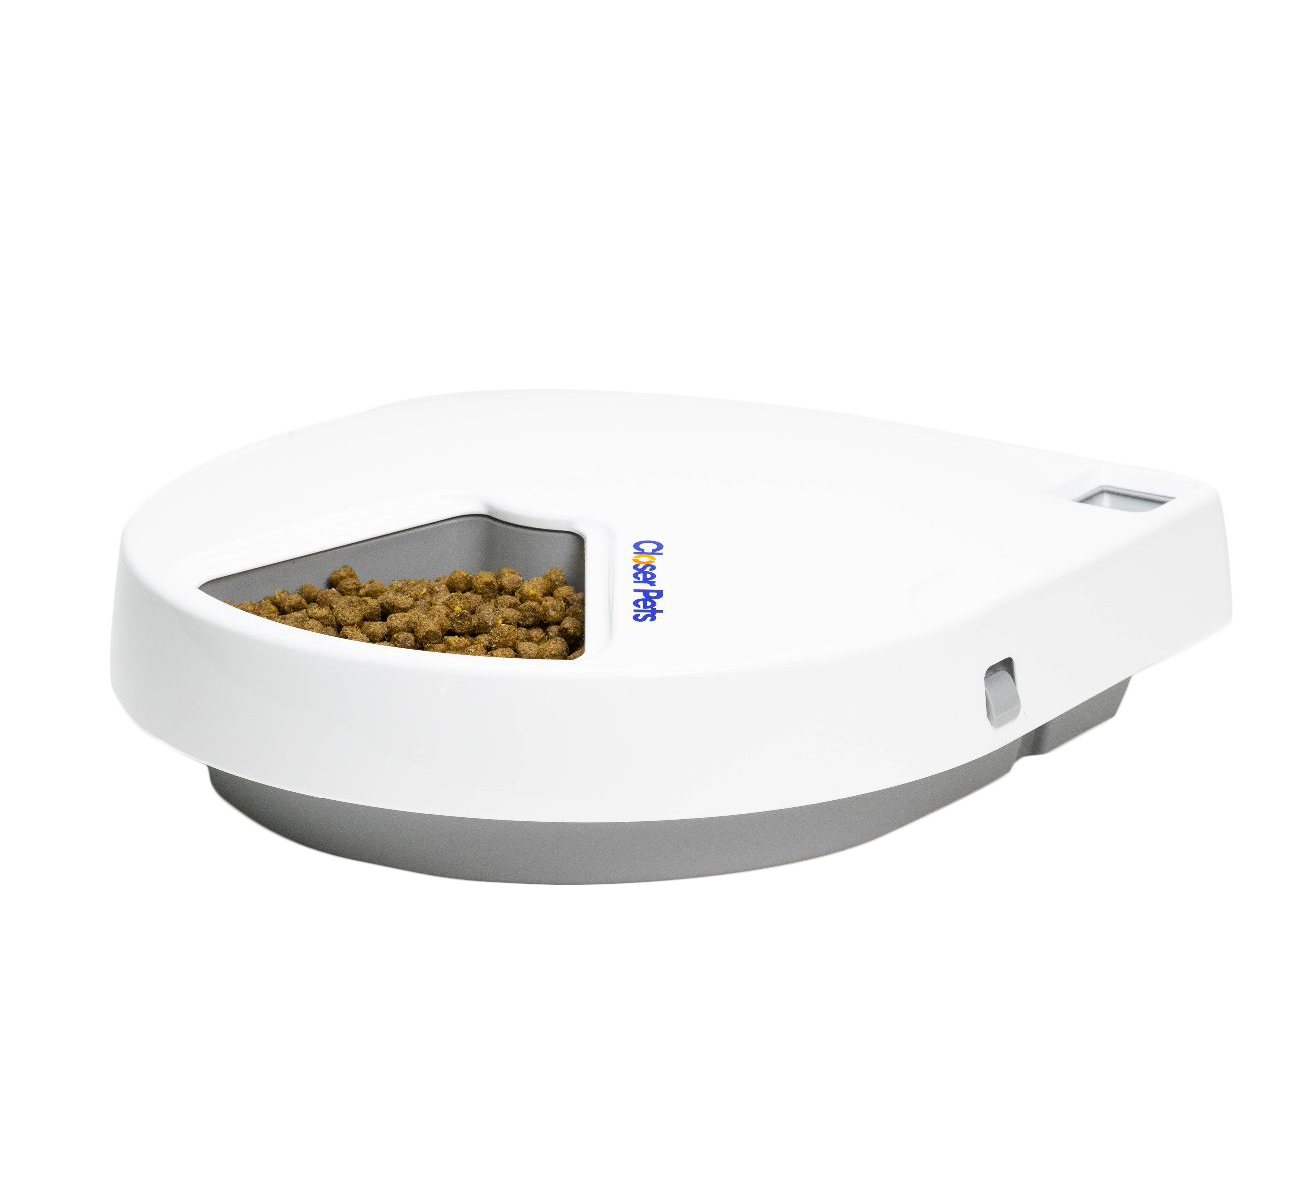 Five-meal Automatic Pet Feeder with Digital Timer (C500)